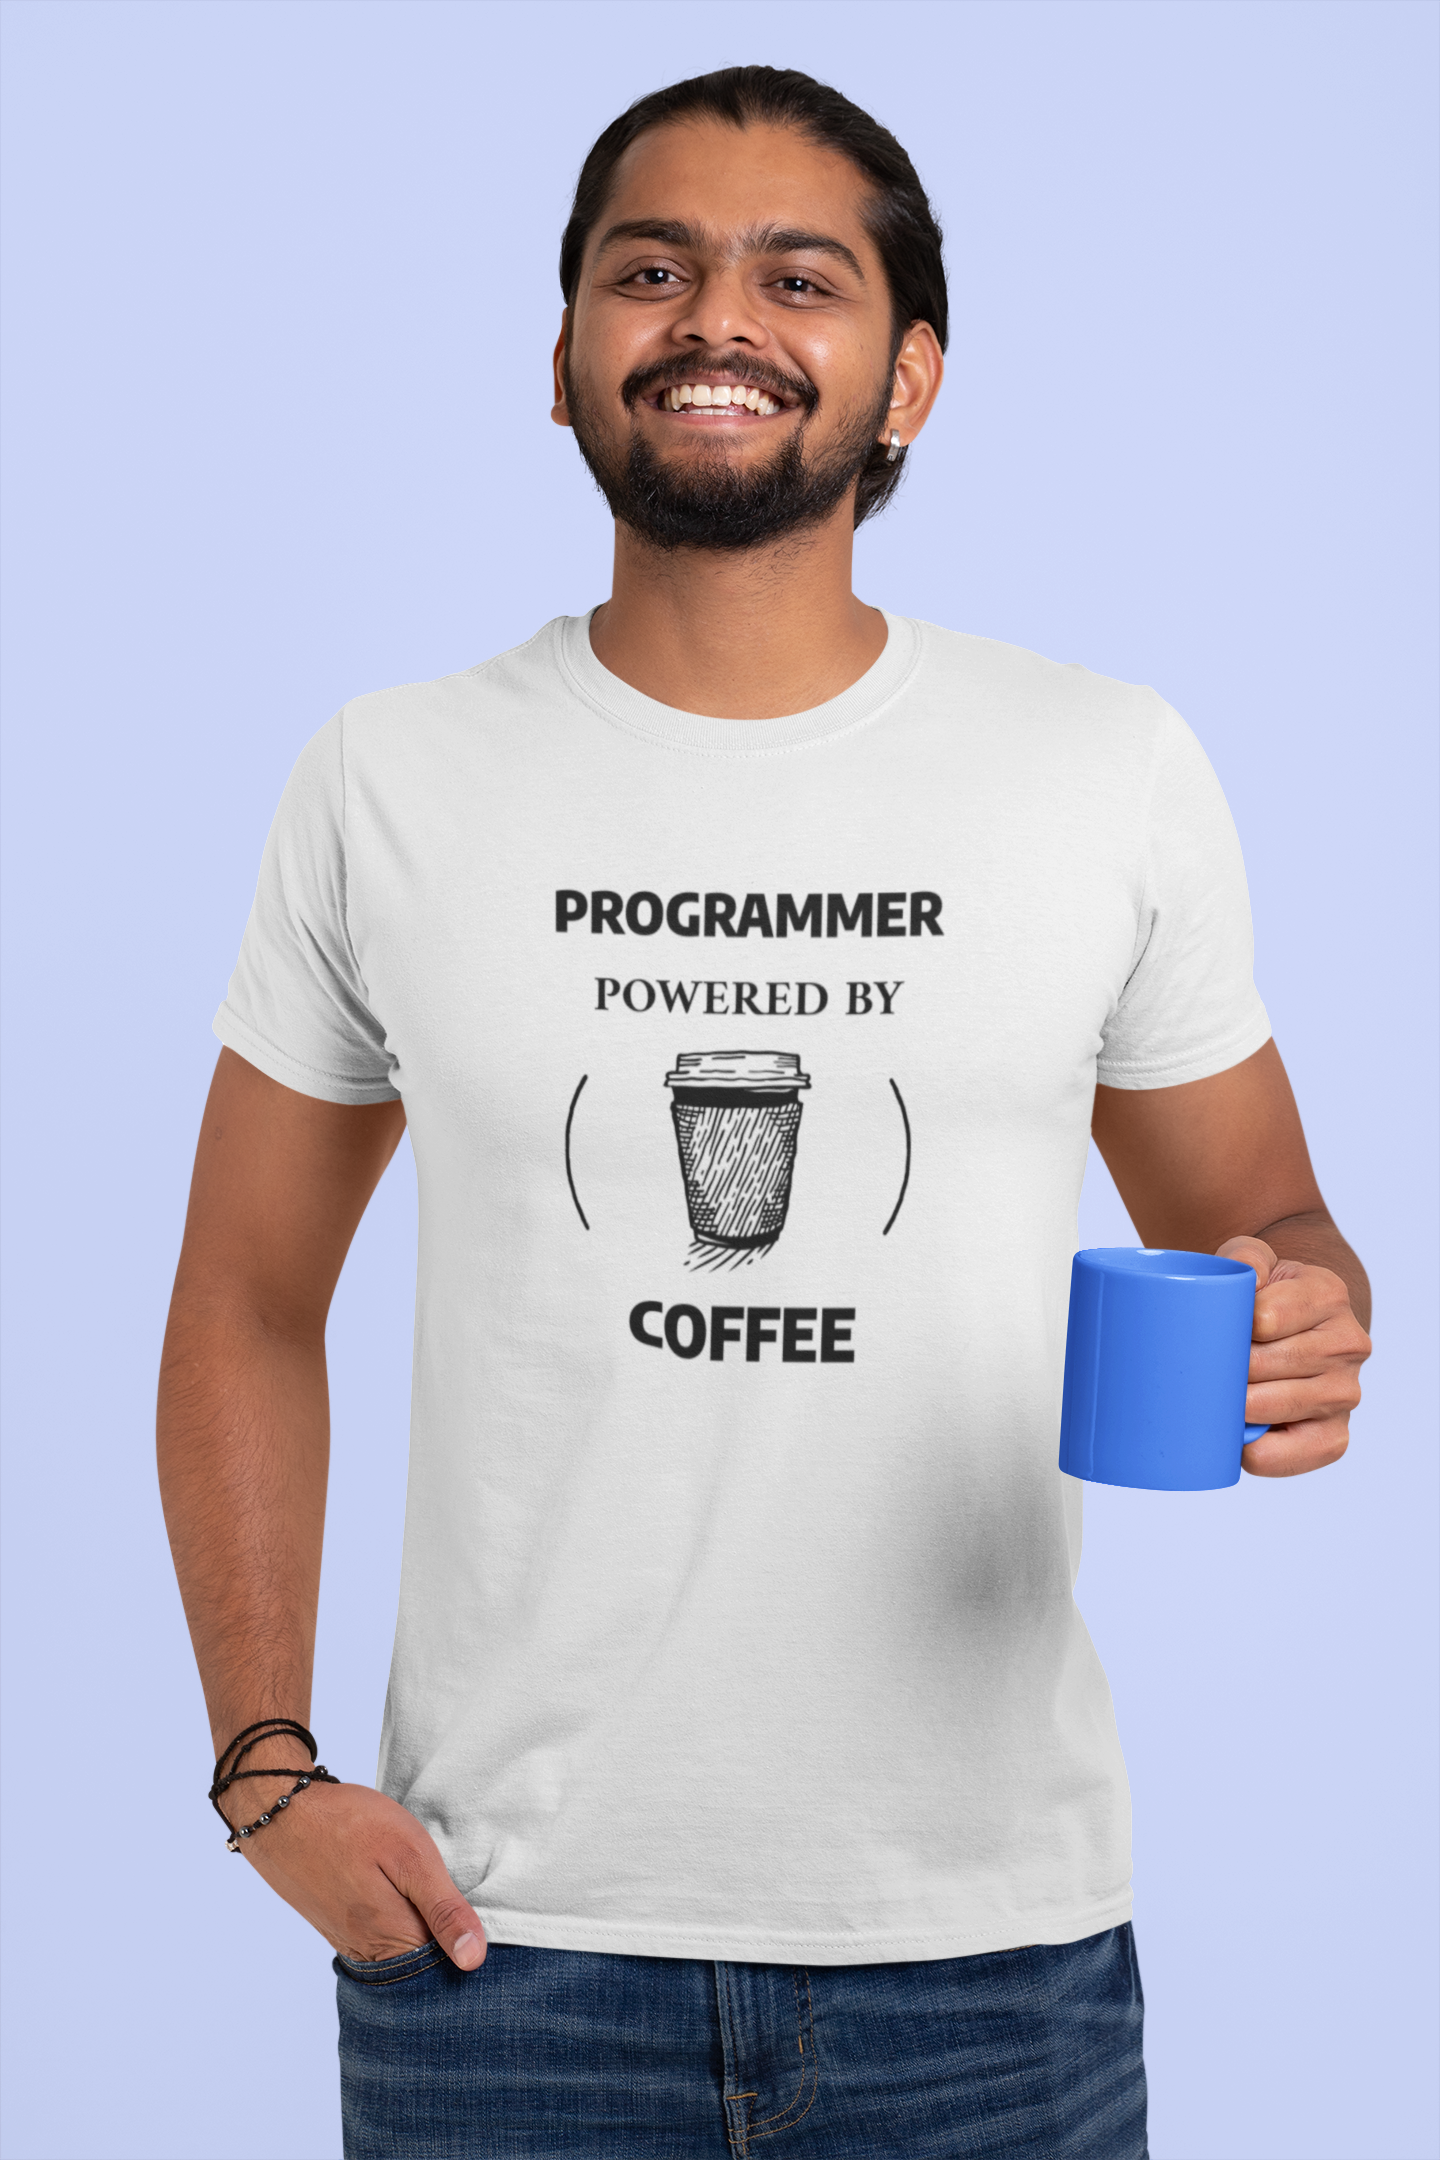 Programmer Powered By Coffee Men T-Shirt for programmers - nautunkee.com